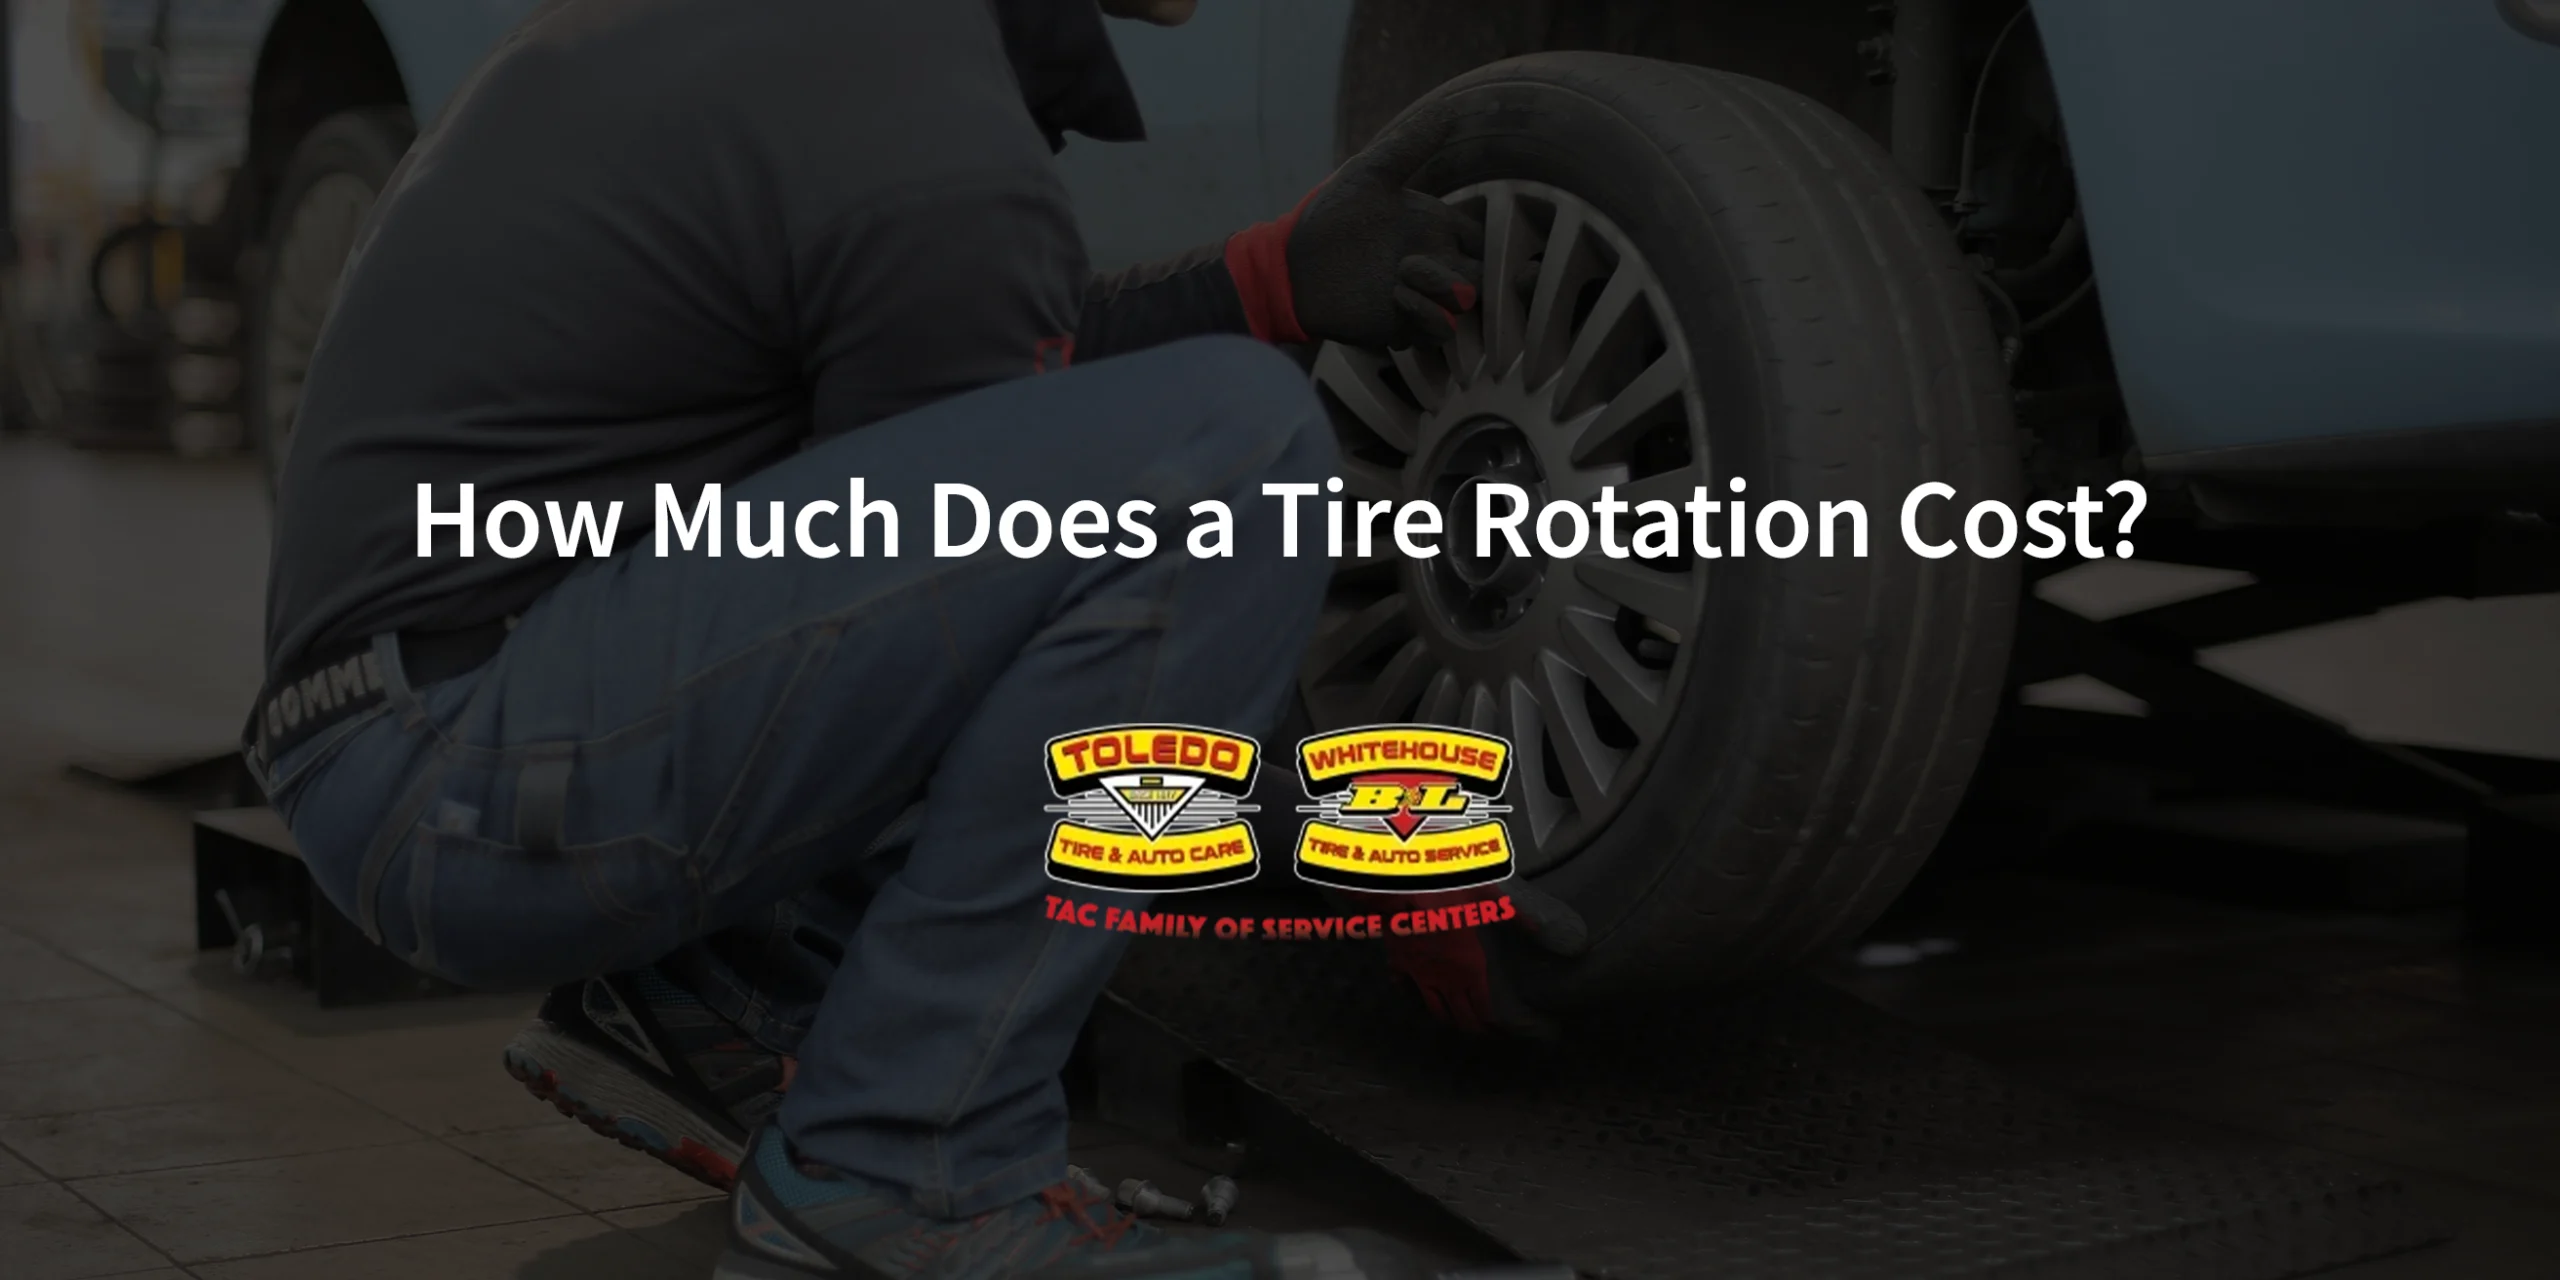 How Much Does a Tire Rotation Cost?